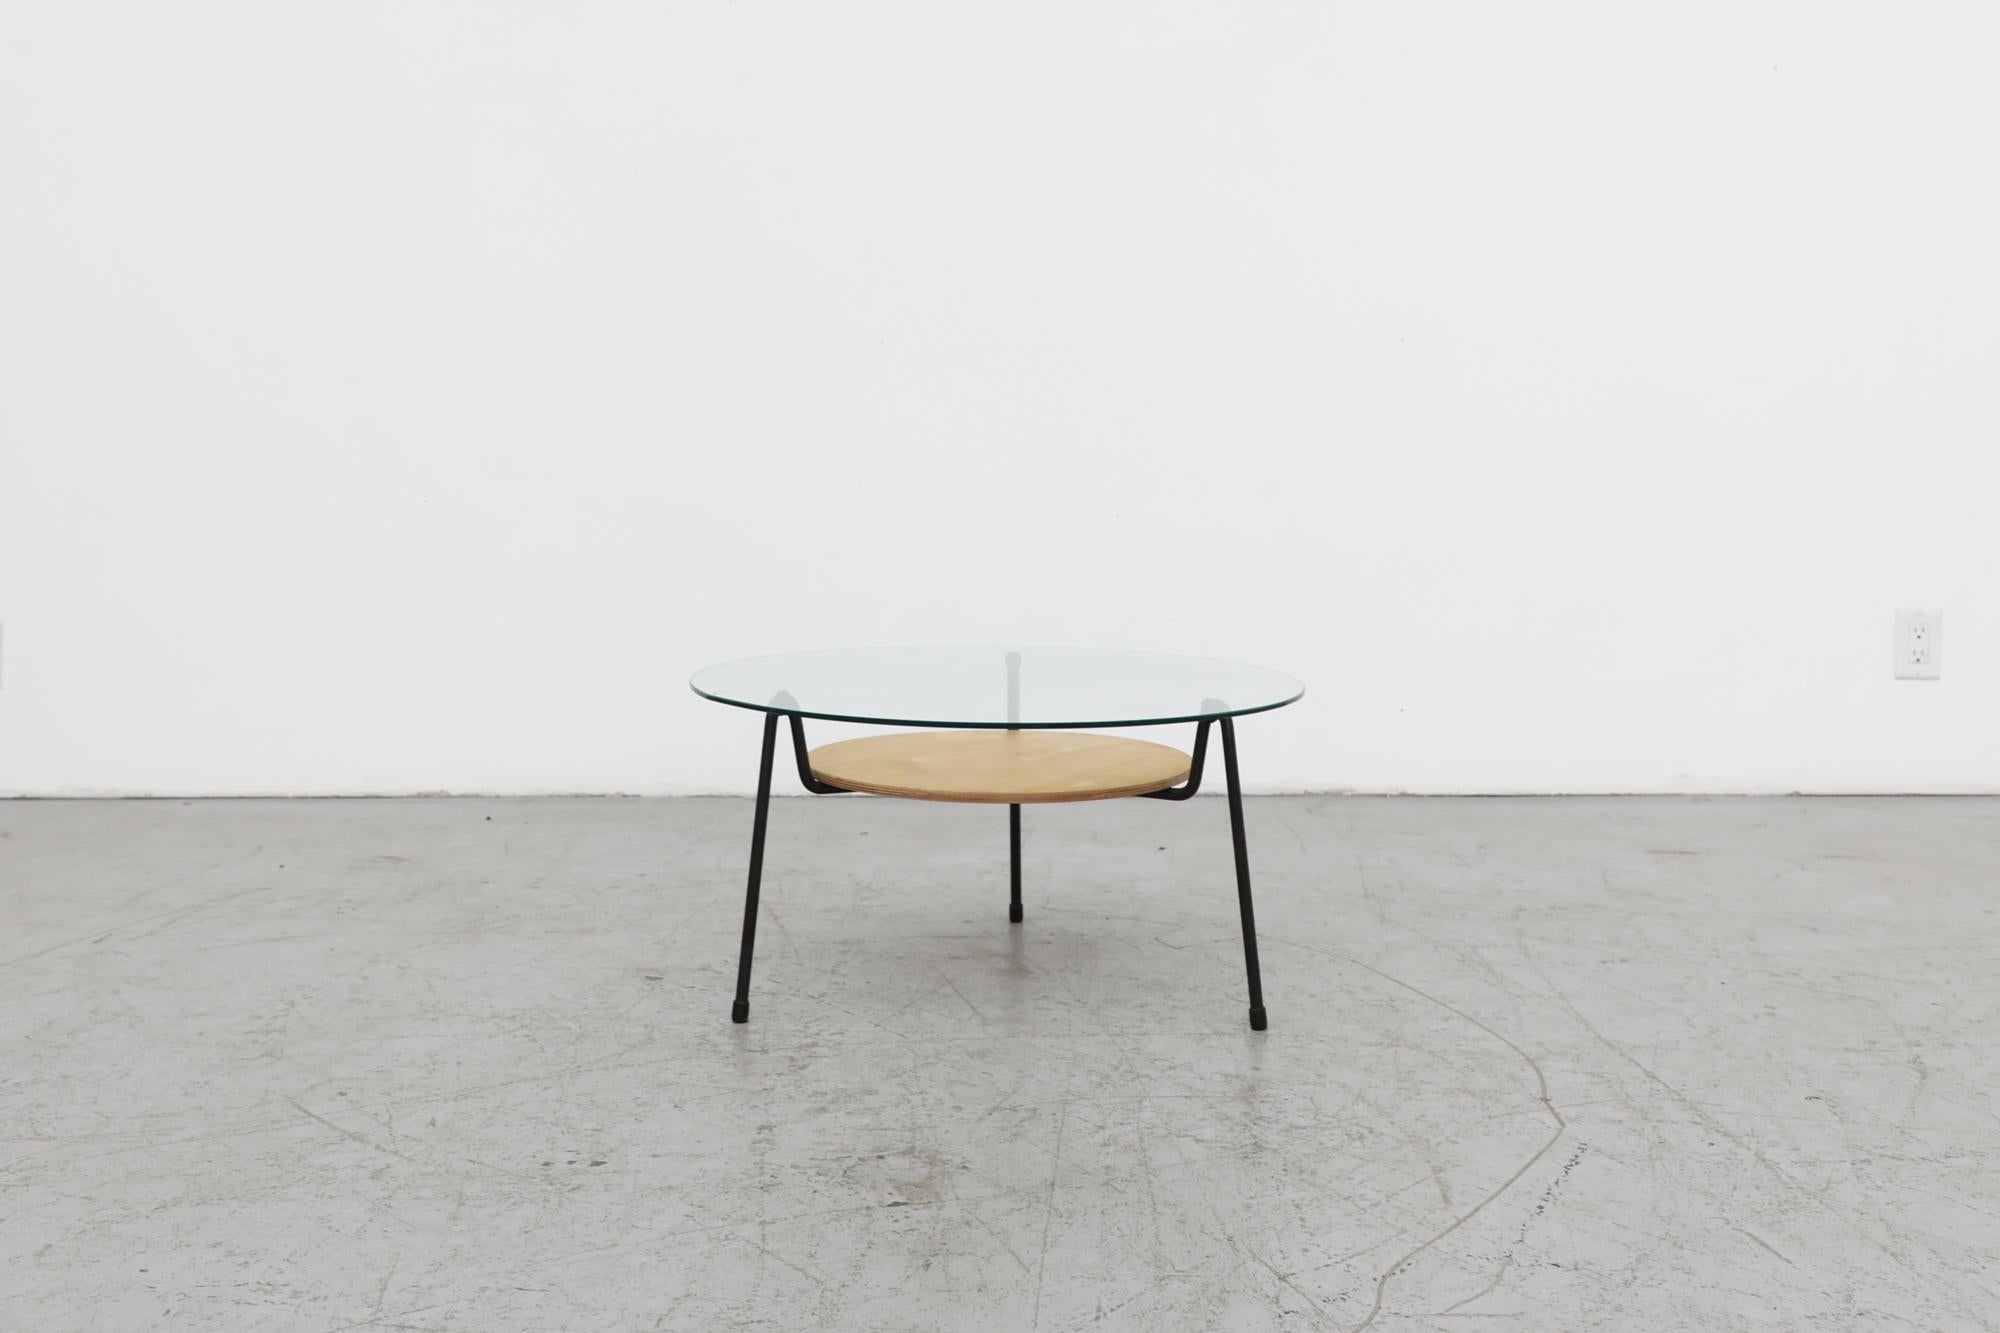 This 'Mosquito' coffee table, Model No. 535, is by famous Dutch designer Wim Rietveld for Gispen. The table has thin black enameled metal legs inspirited as 